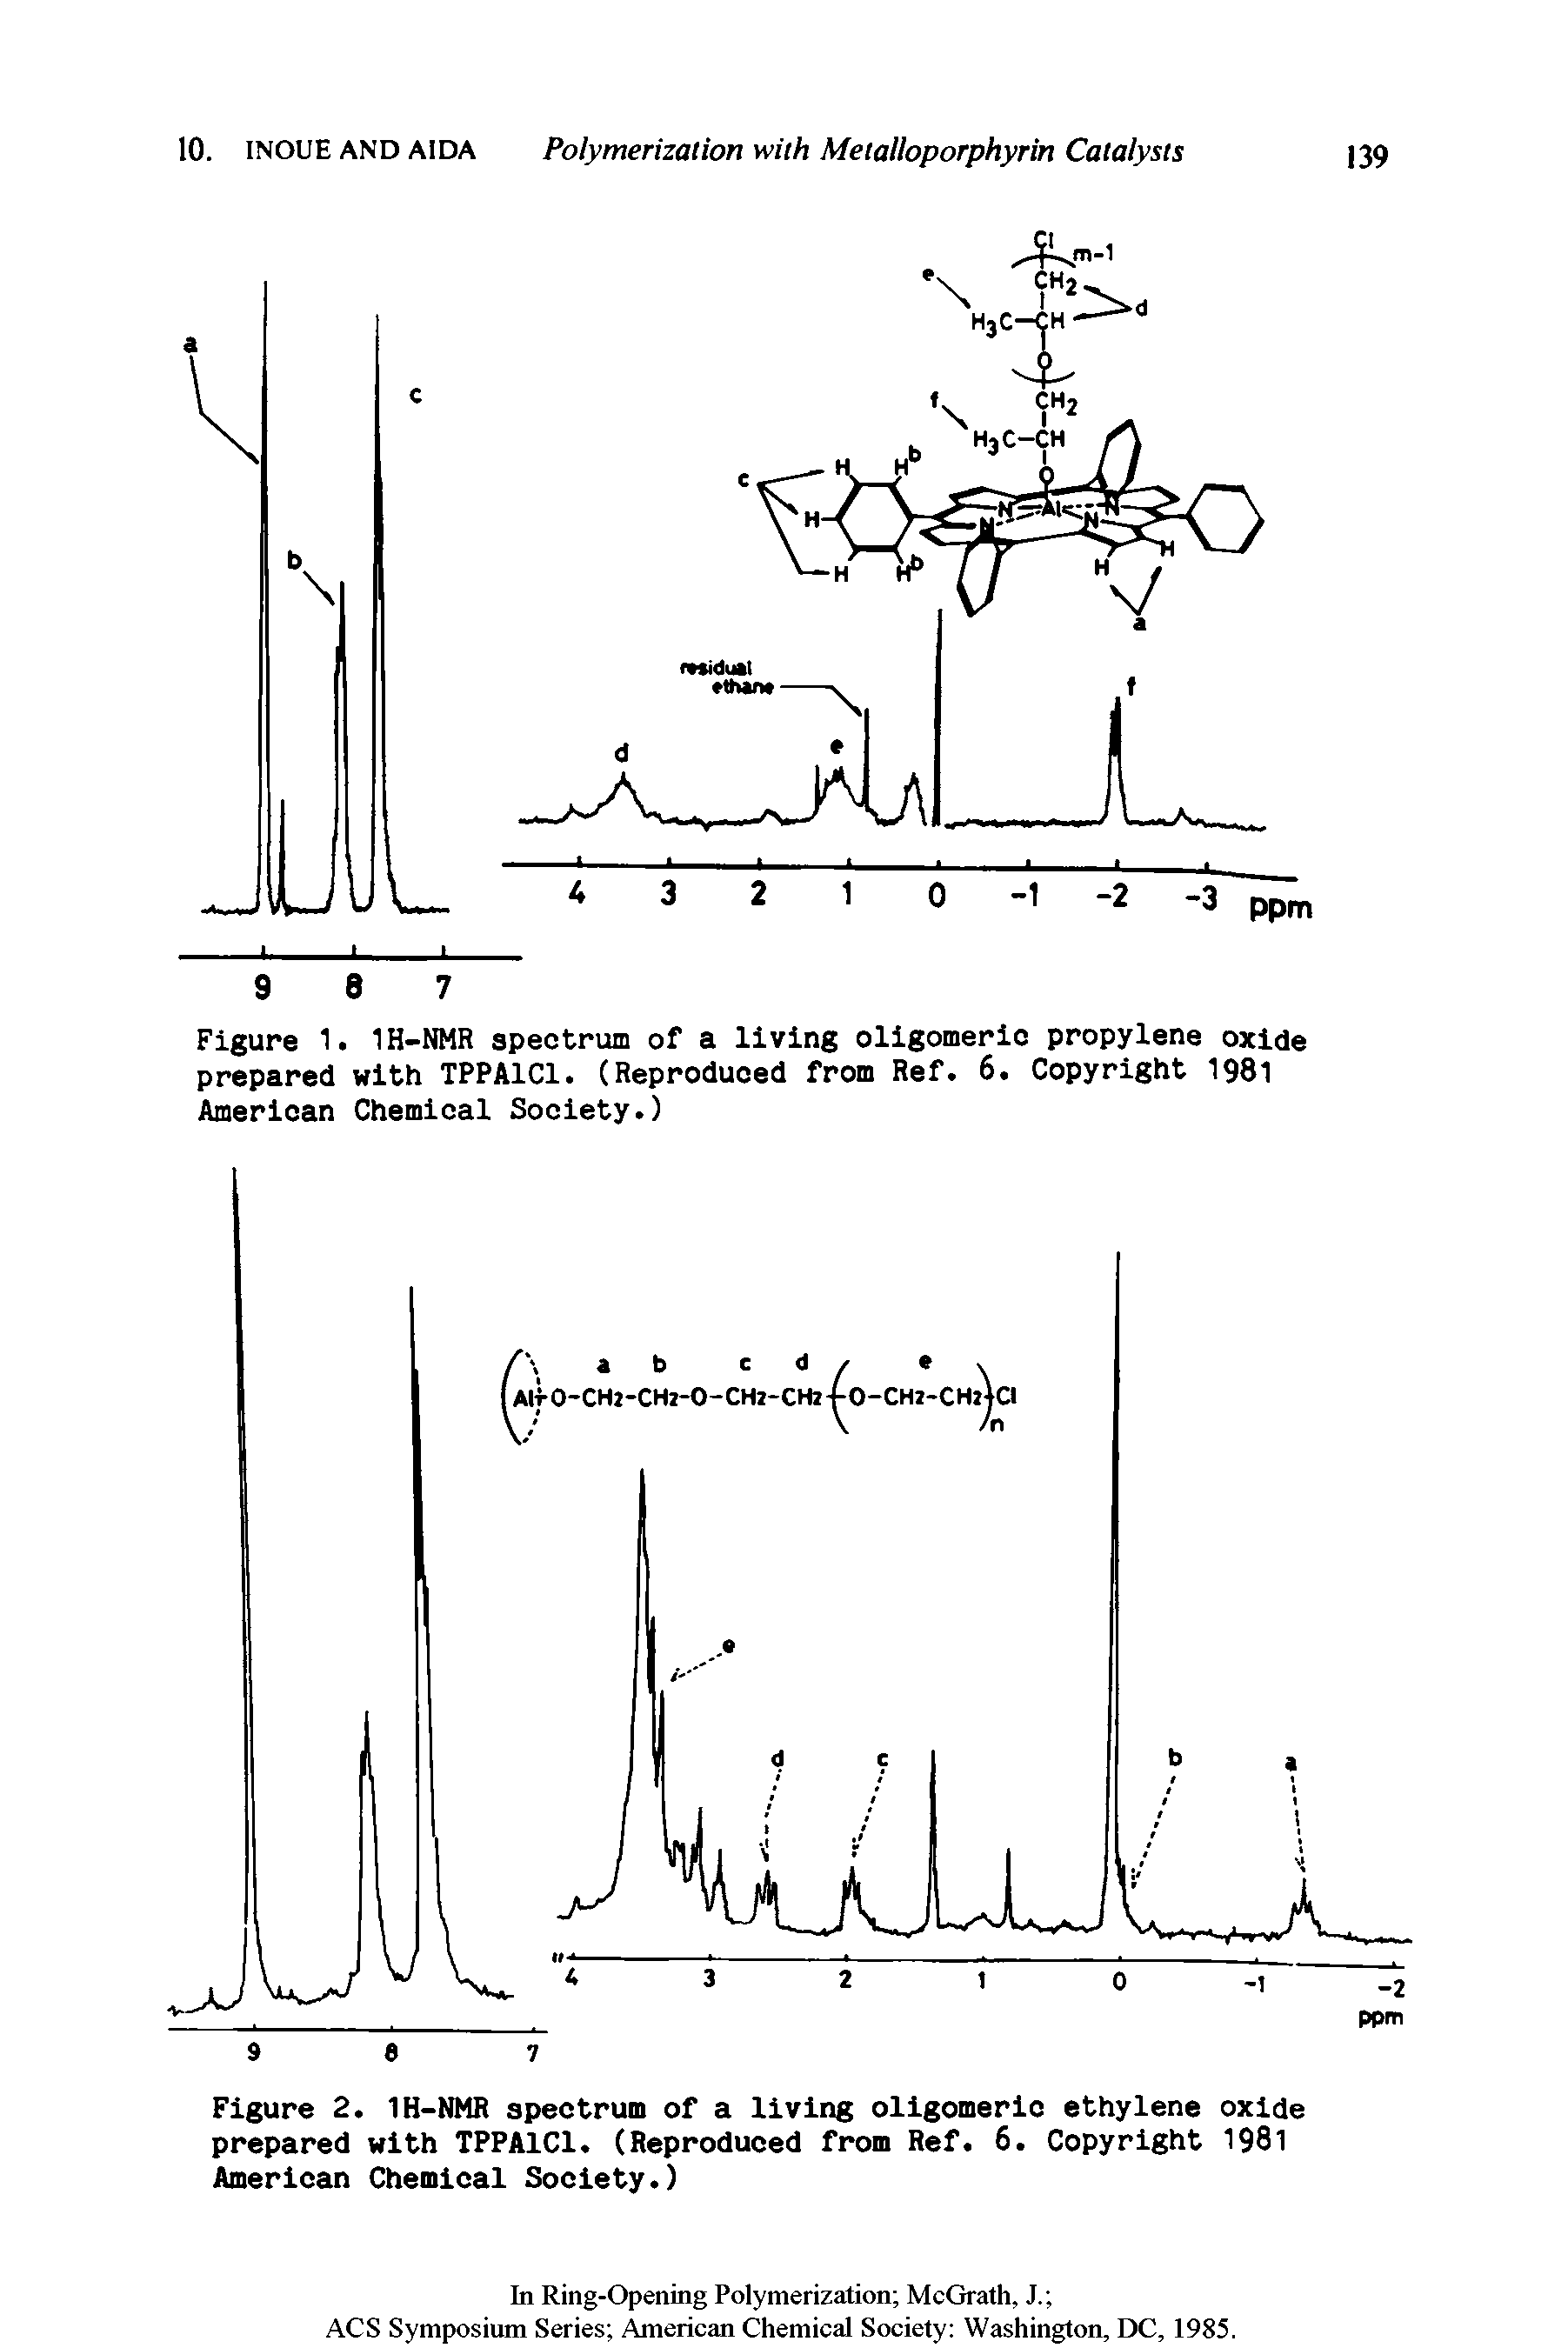 Figure 1. 1H-NMR spectrum of a living oligomeric propylene oxide prepared with TPPAICI. (Reproduced from Ref. 6. Copyright 1981 American Chemical Society.)...